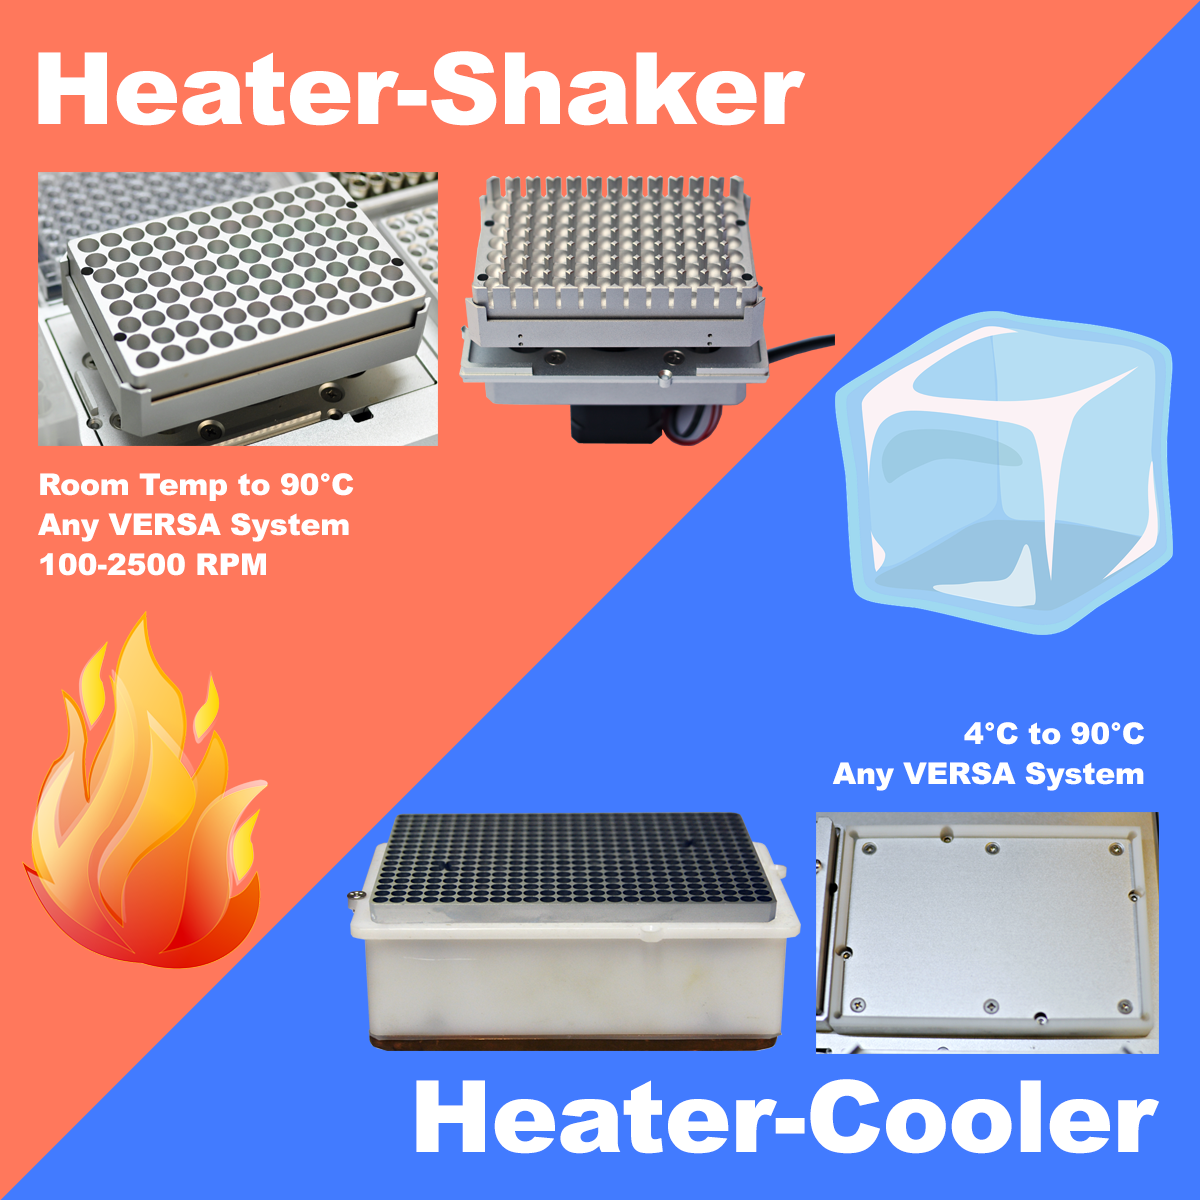 VERSA heater-shaker and heater-cooler. Image shows the different units both on their own and what they look like installed inside a VERSA automated liquid handler. Image created by William Vincent-Killian